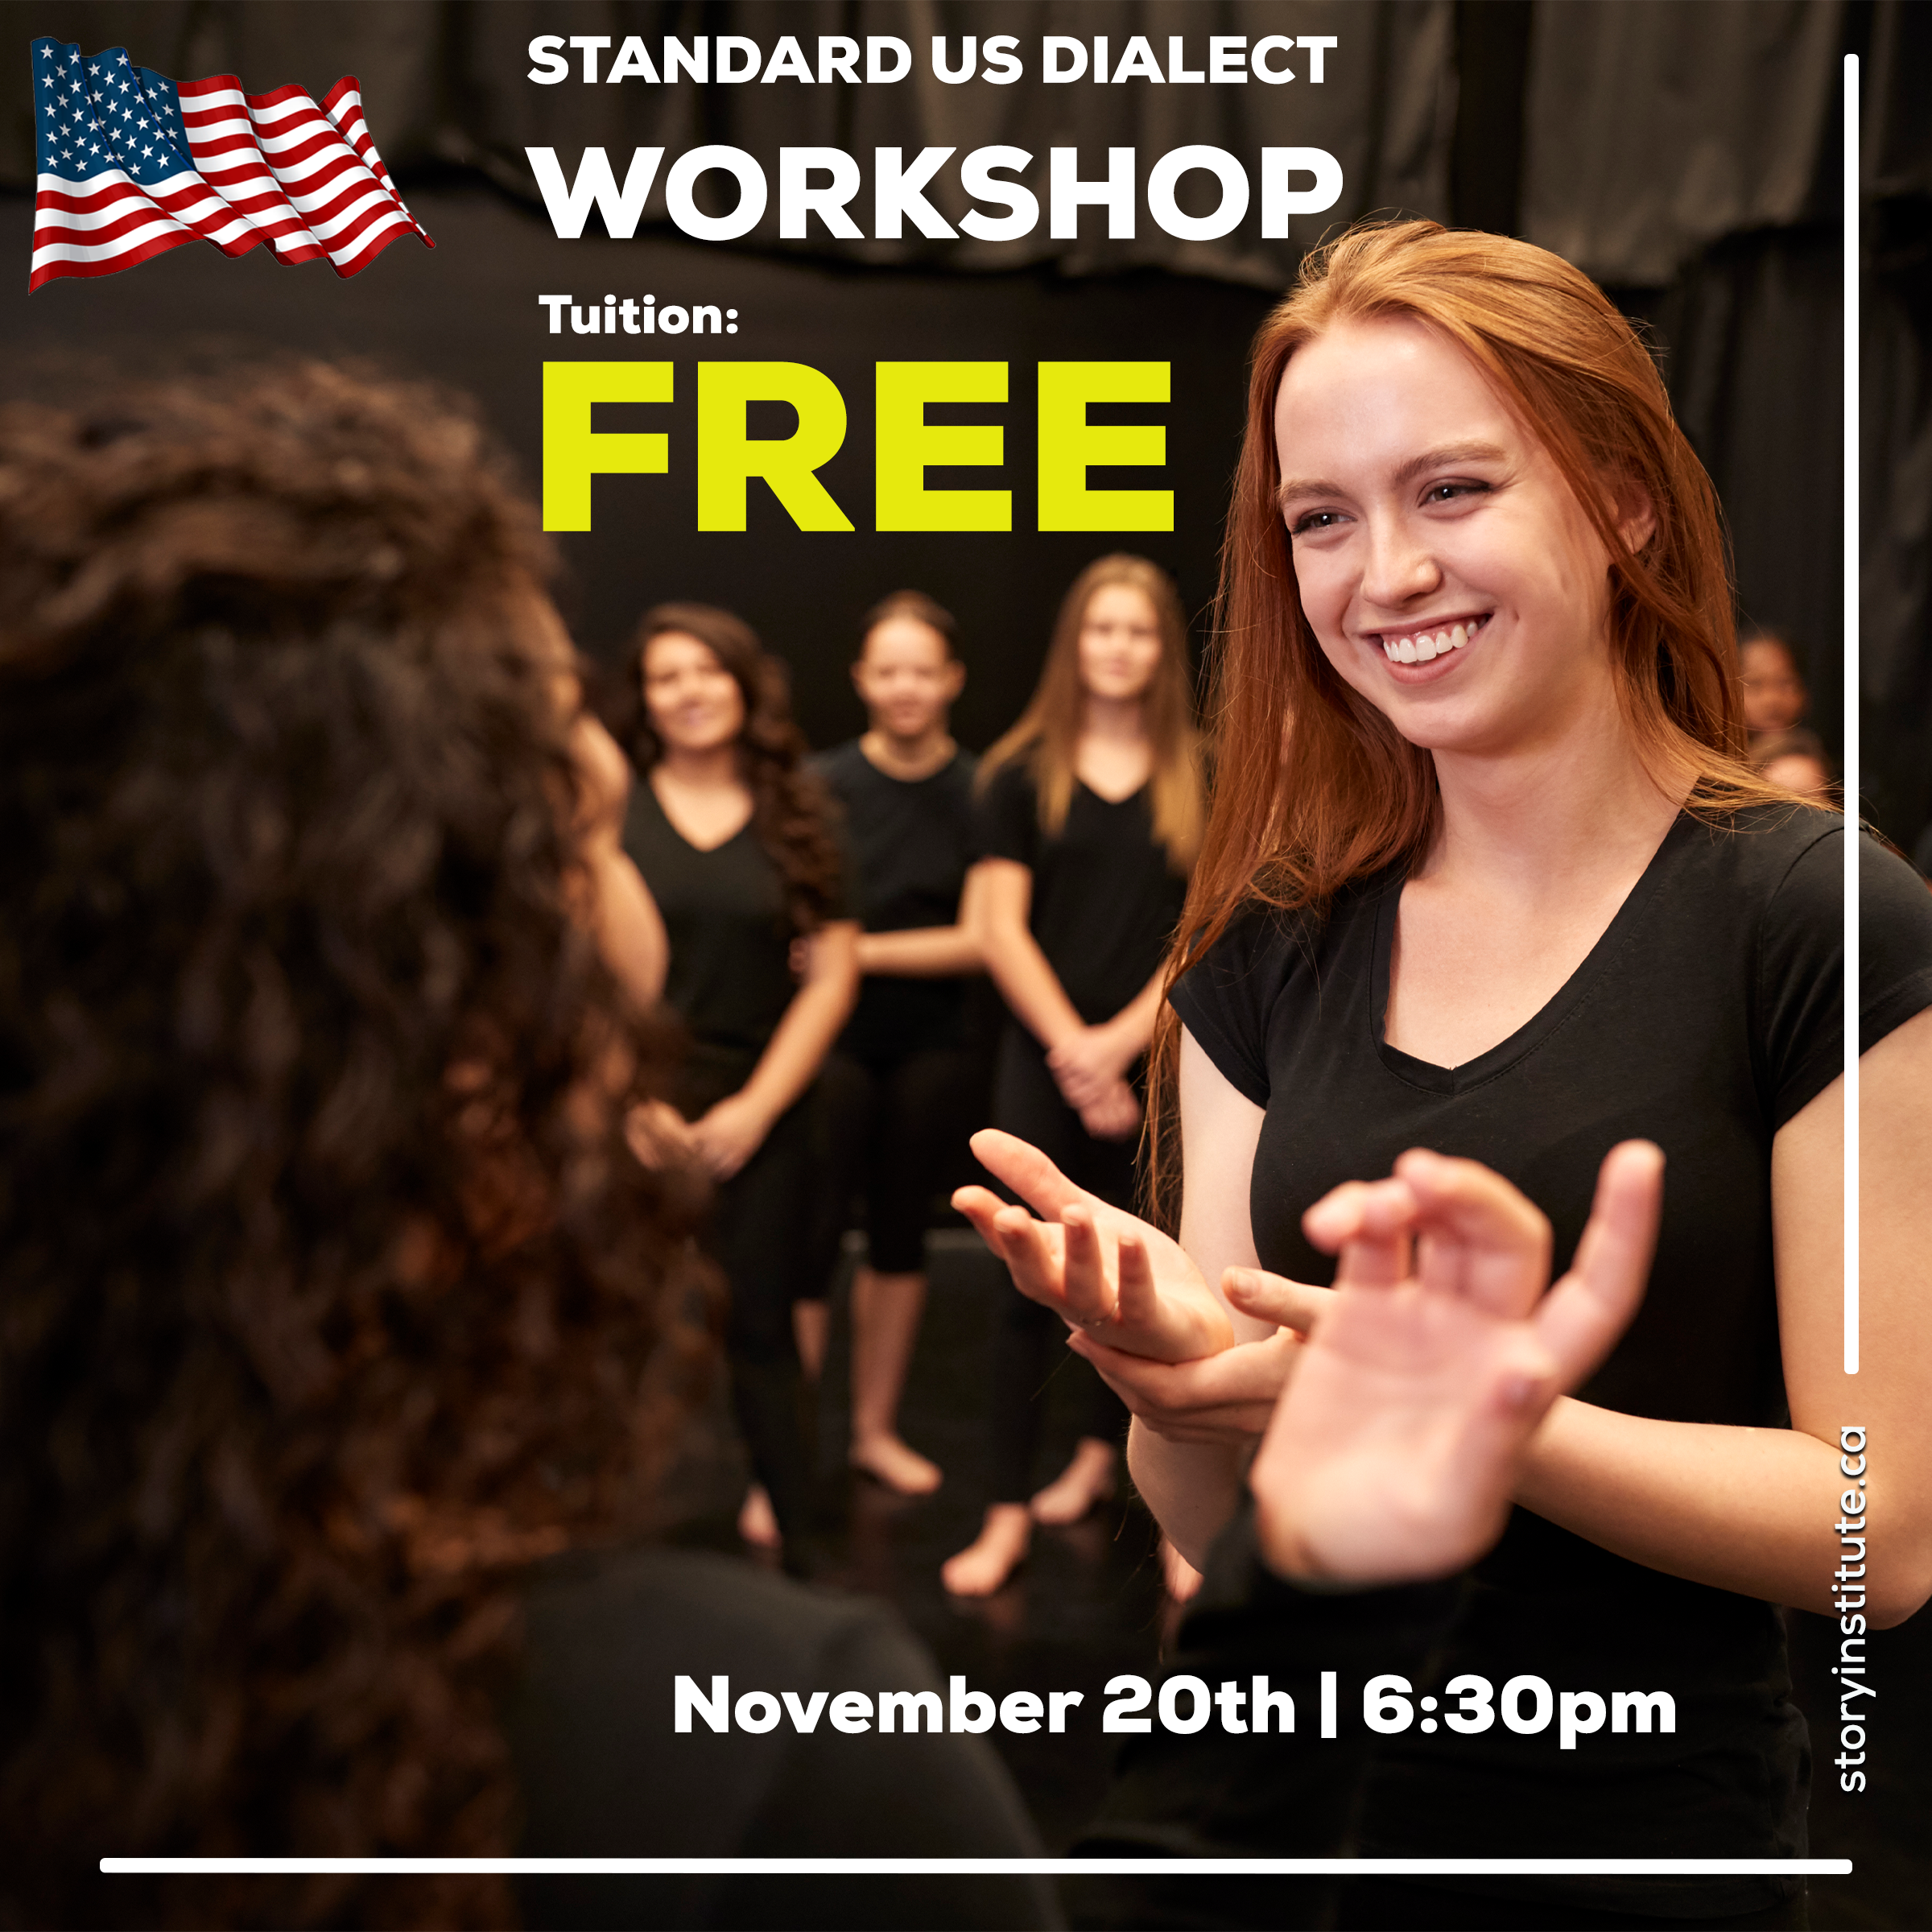 FREE US Dialect Workshop